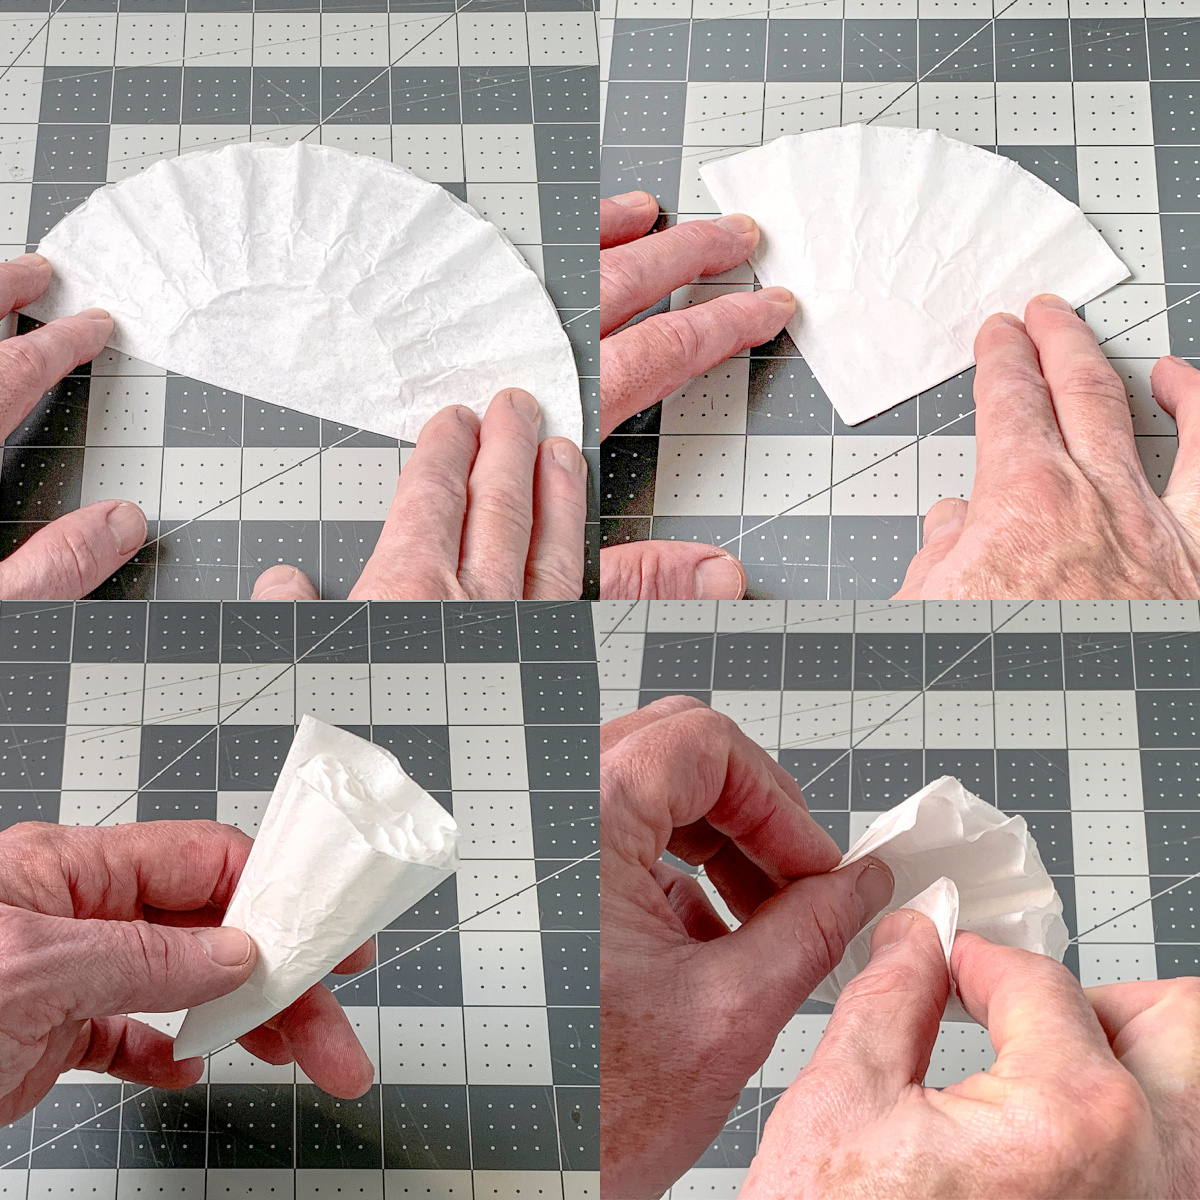 Folding a coffee filter into a cone shape